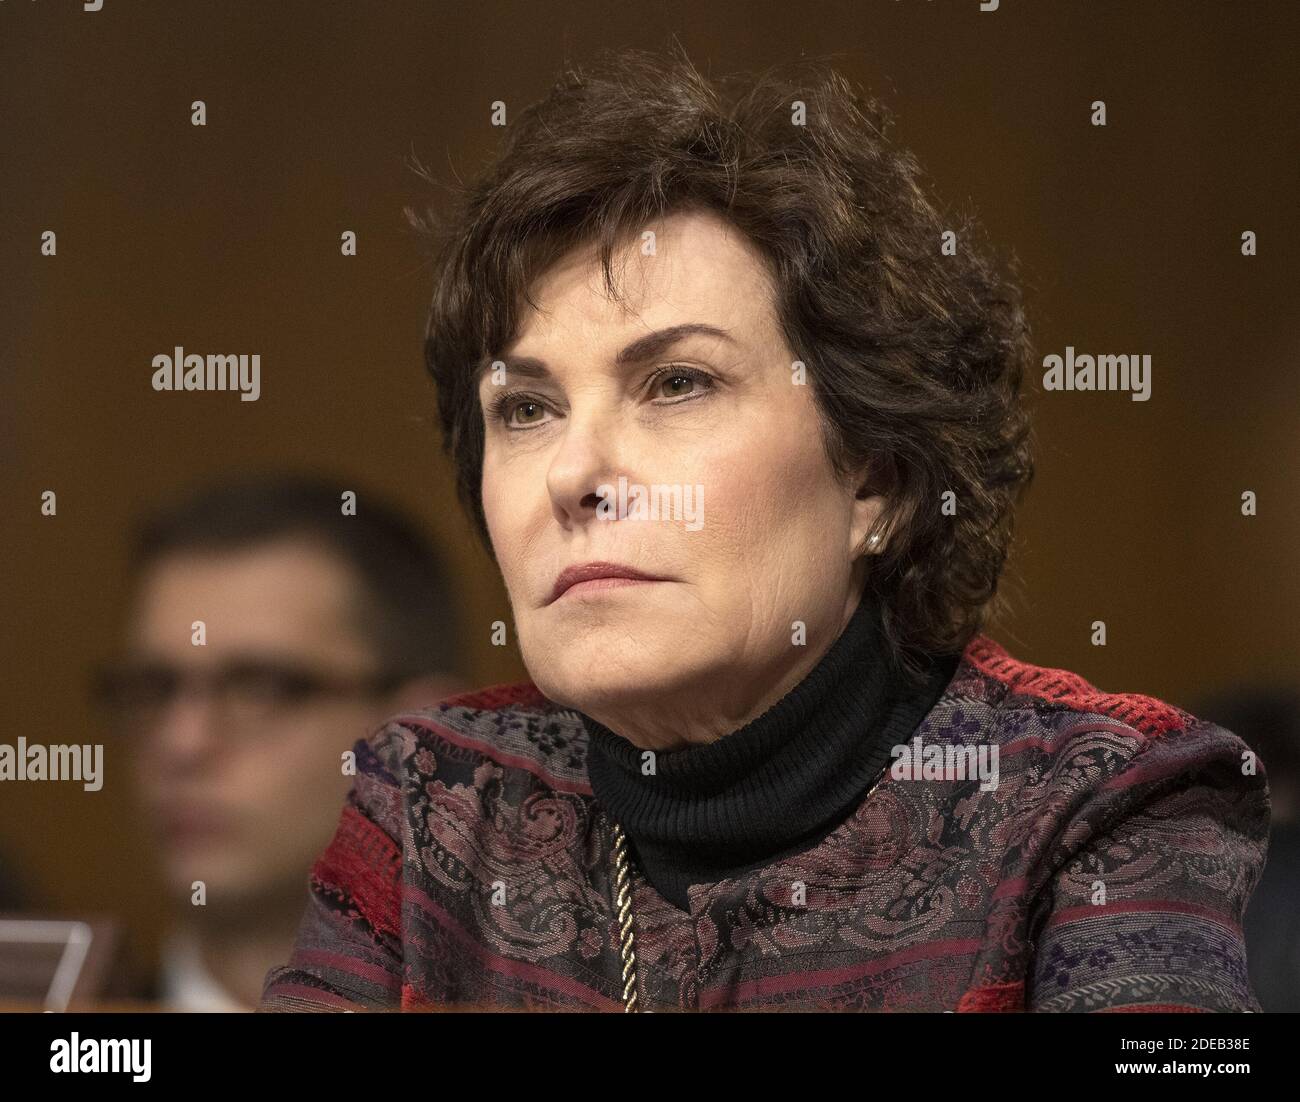 United States Senator Jacky Rosen (Democrat of Nevada) listens to the testimony before the US Senate Committee on Homeland Security and Governmental Affairs Permanent Subcommittee on Investigations during a hearing on 'Examining Private Sector Data Breaches' on Capitol Hill in Washington, DC on Thursday, March 7, 2019.Photo by Ron Sachs/CNP/ABACAPRESS.COM Stock Photo